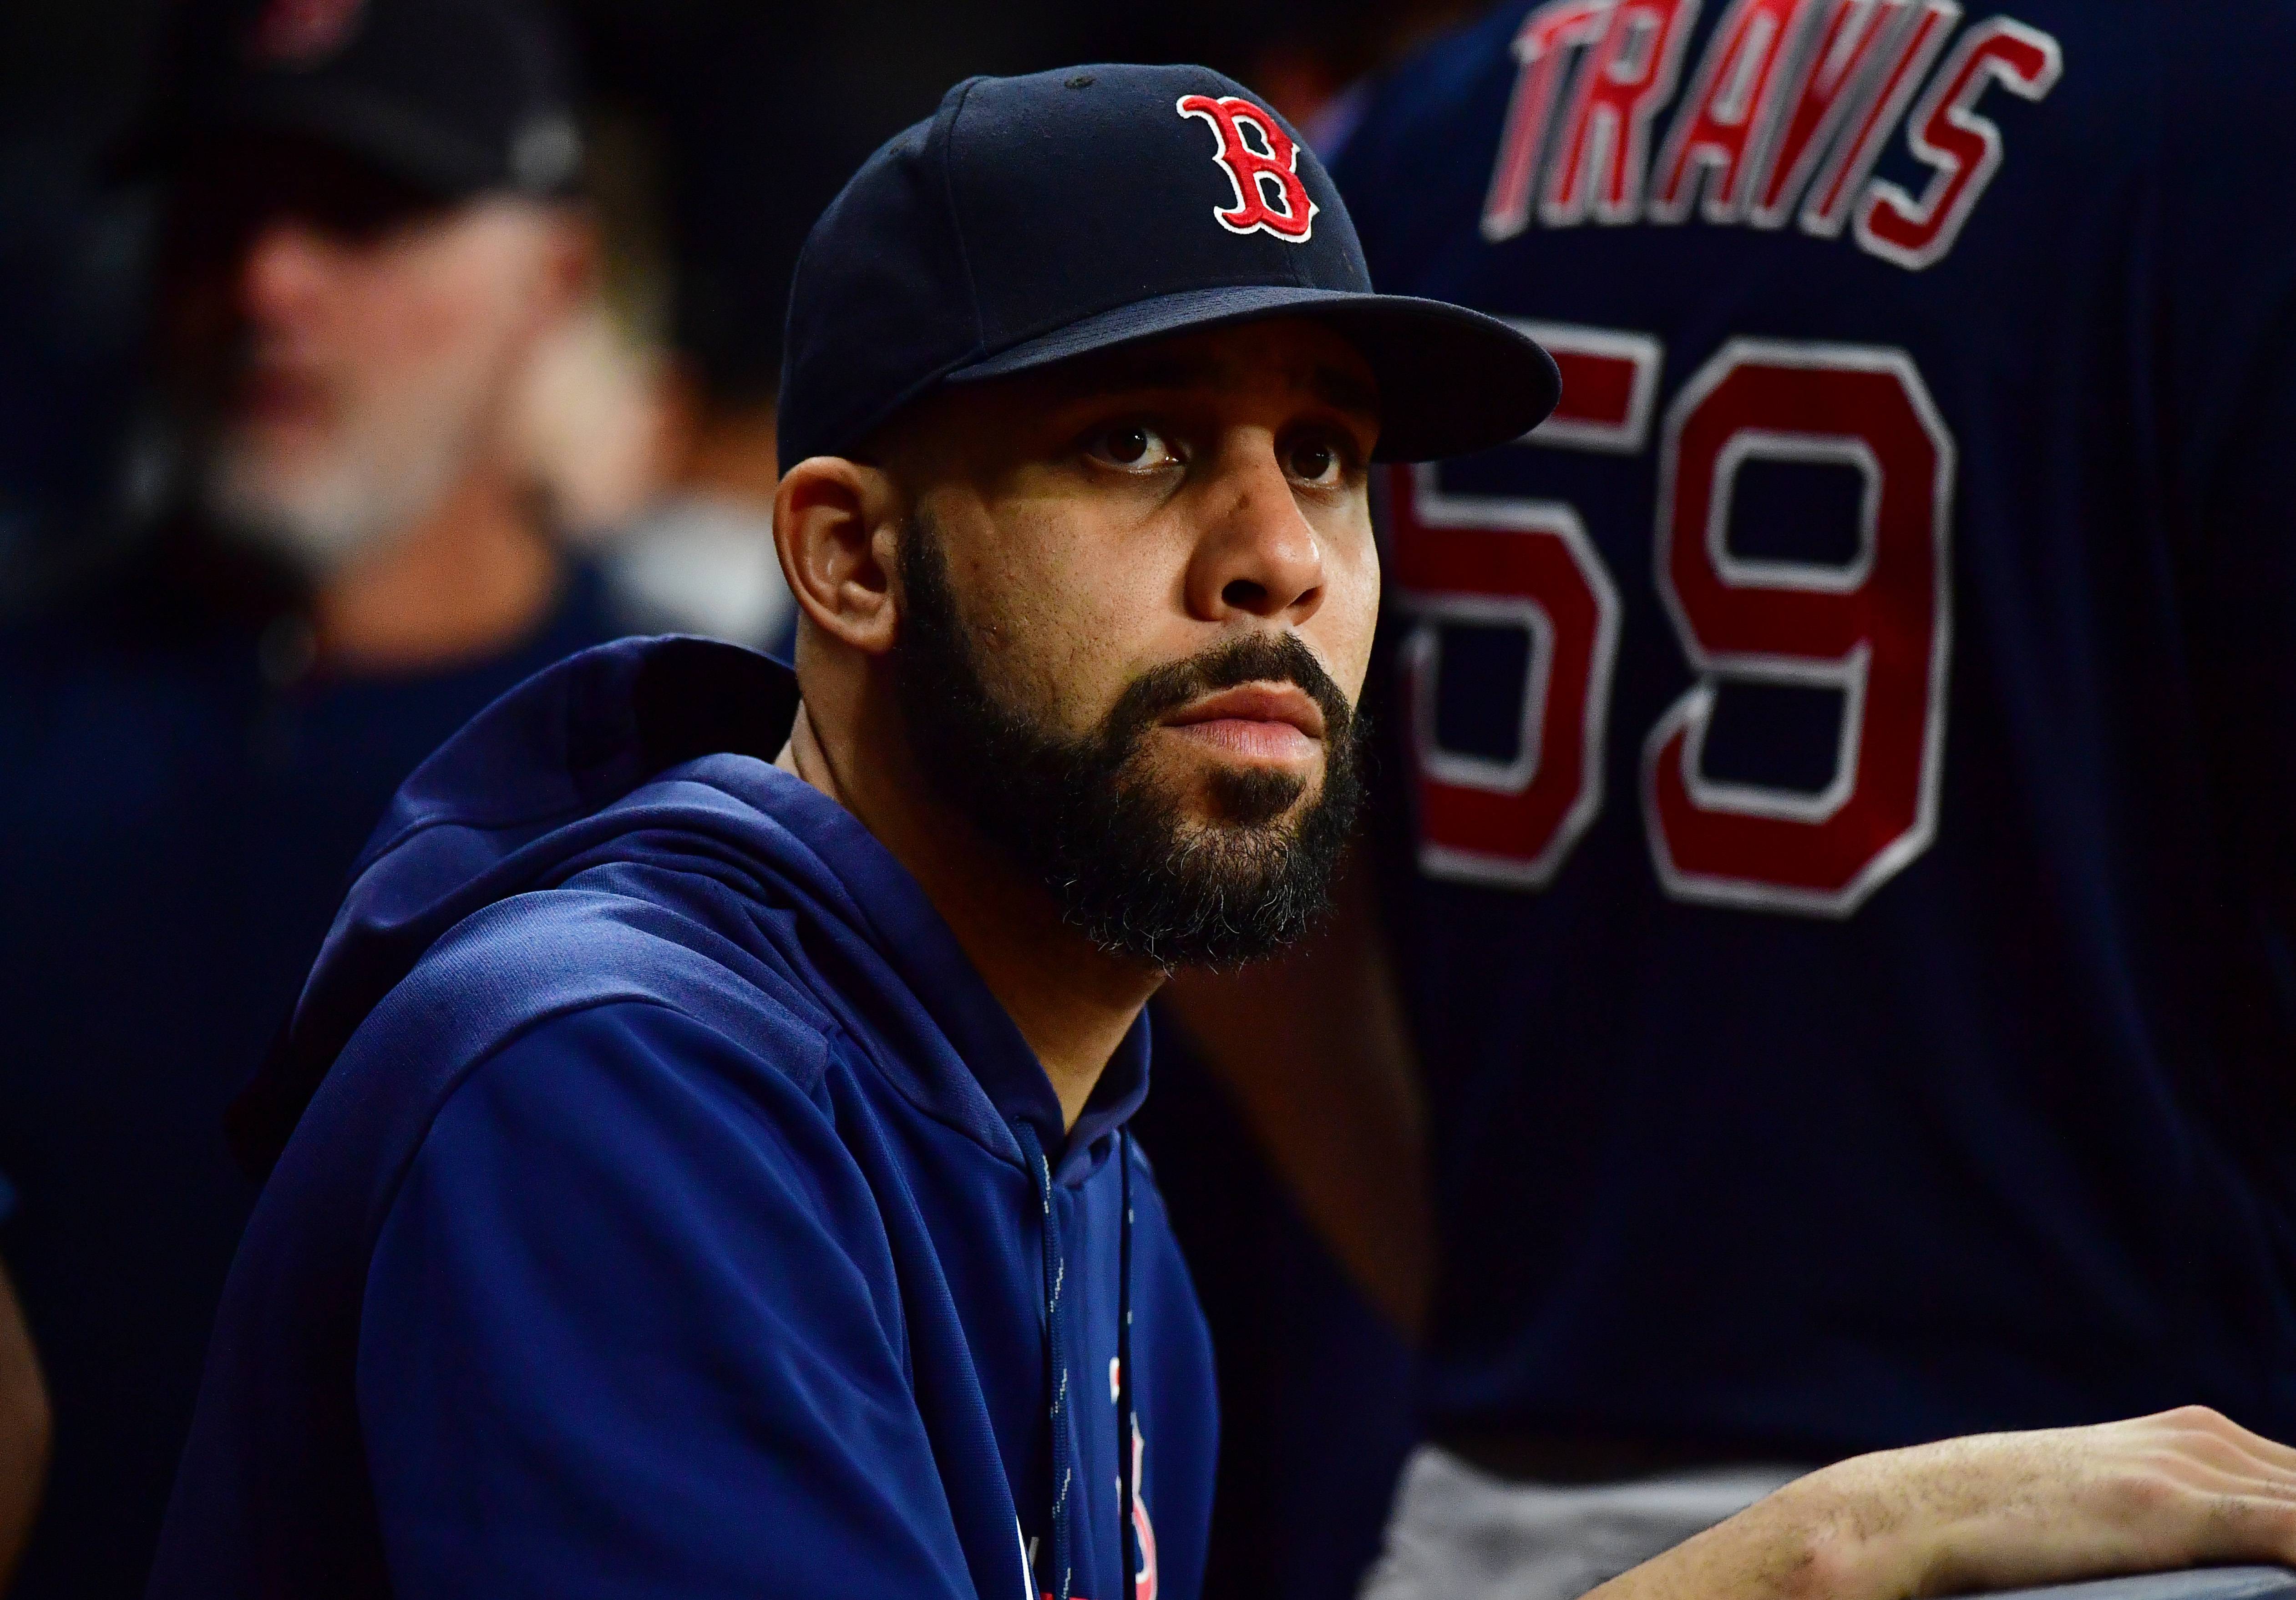 ST PETERSBURG, FLORIDA - SEPTEMBER 20: David Price #10 of the Boston Red Sox looks on during a game against the Tampa Bay Rays at Tropicana Field on September 20, 2019 in St Petersburg, Florida. (Photo by Julio Aguilar/Getty Images)